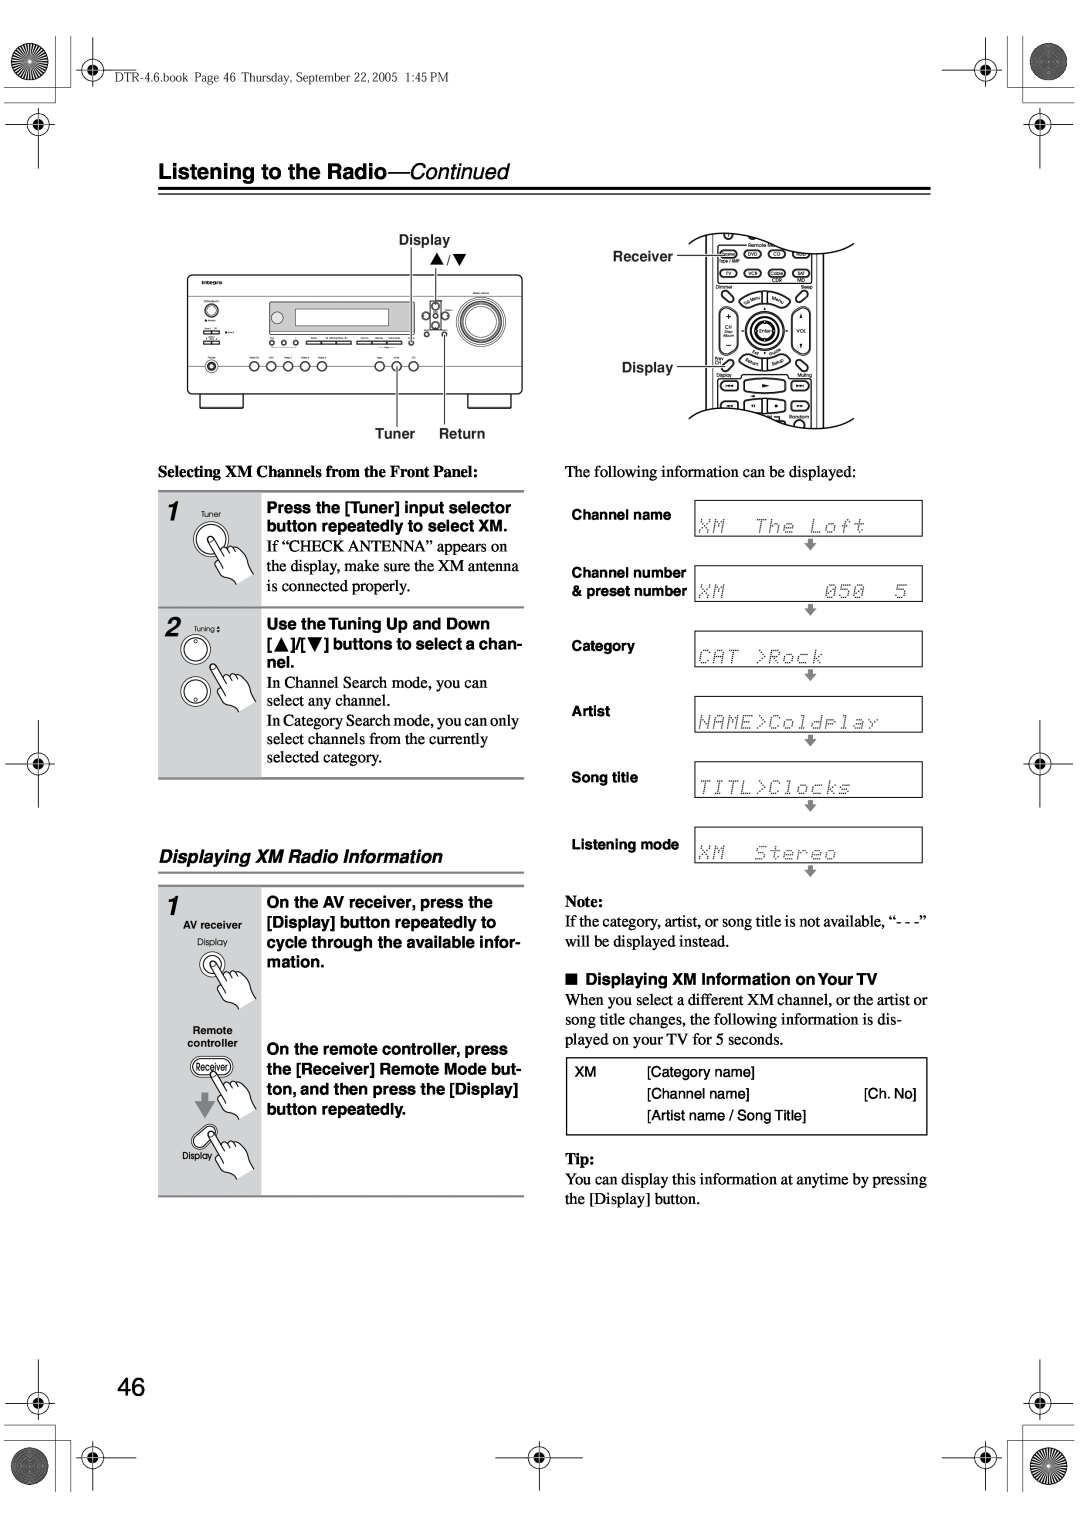 Integra DTR-4.6 instruction manual Displaying XM Radio Information, Selecting XM Channels from the Front Panel 